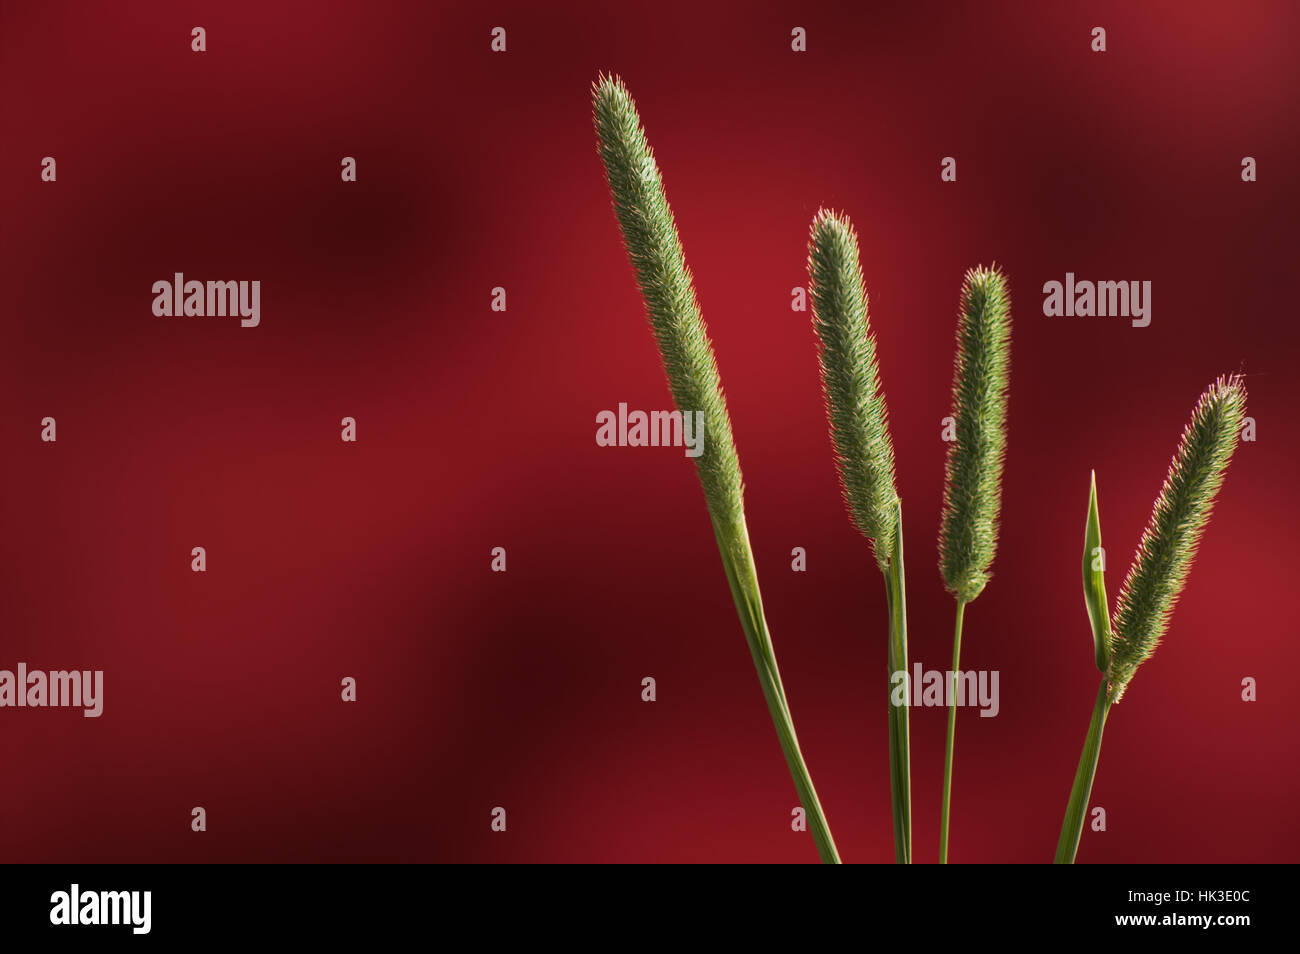 Slender meadow foxtail green tall grass against black background closeup Stock Photo